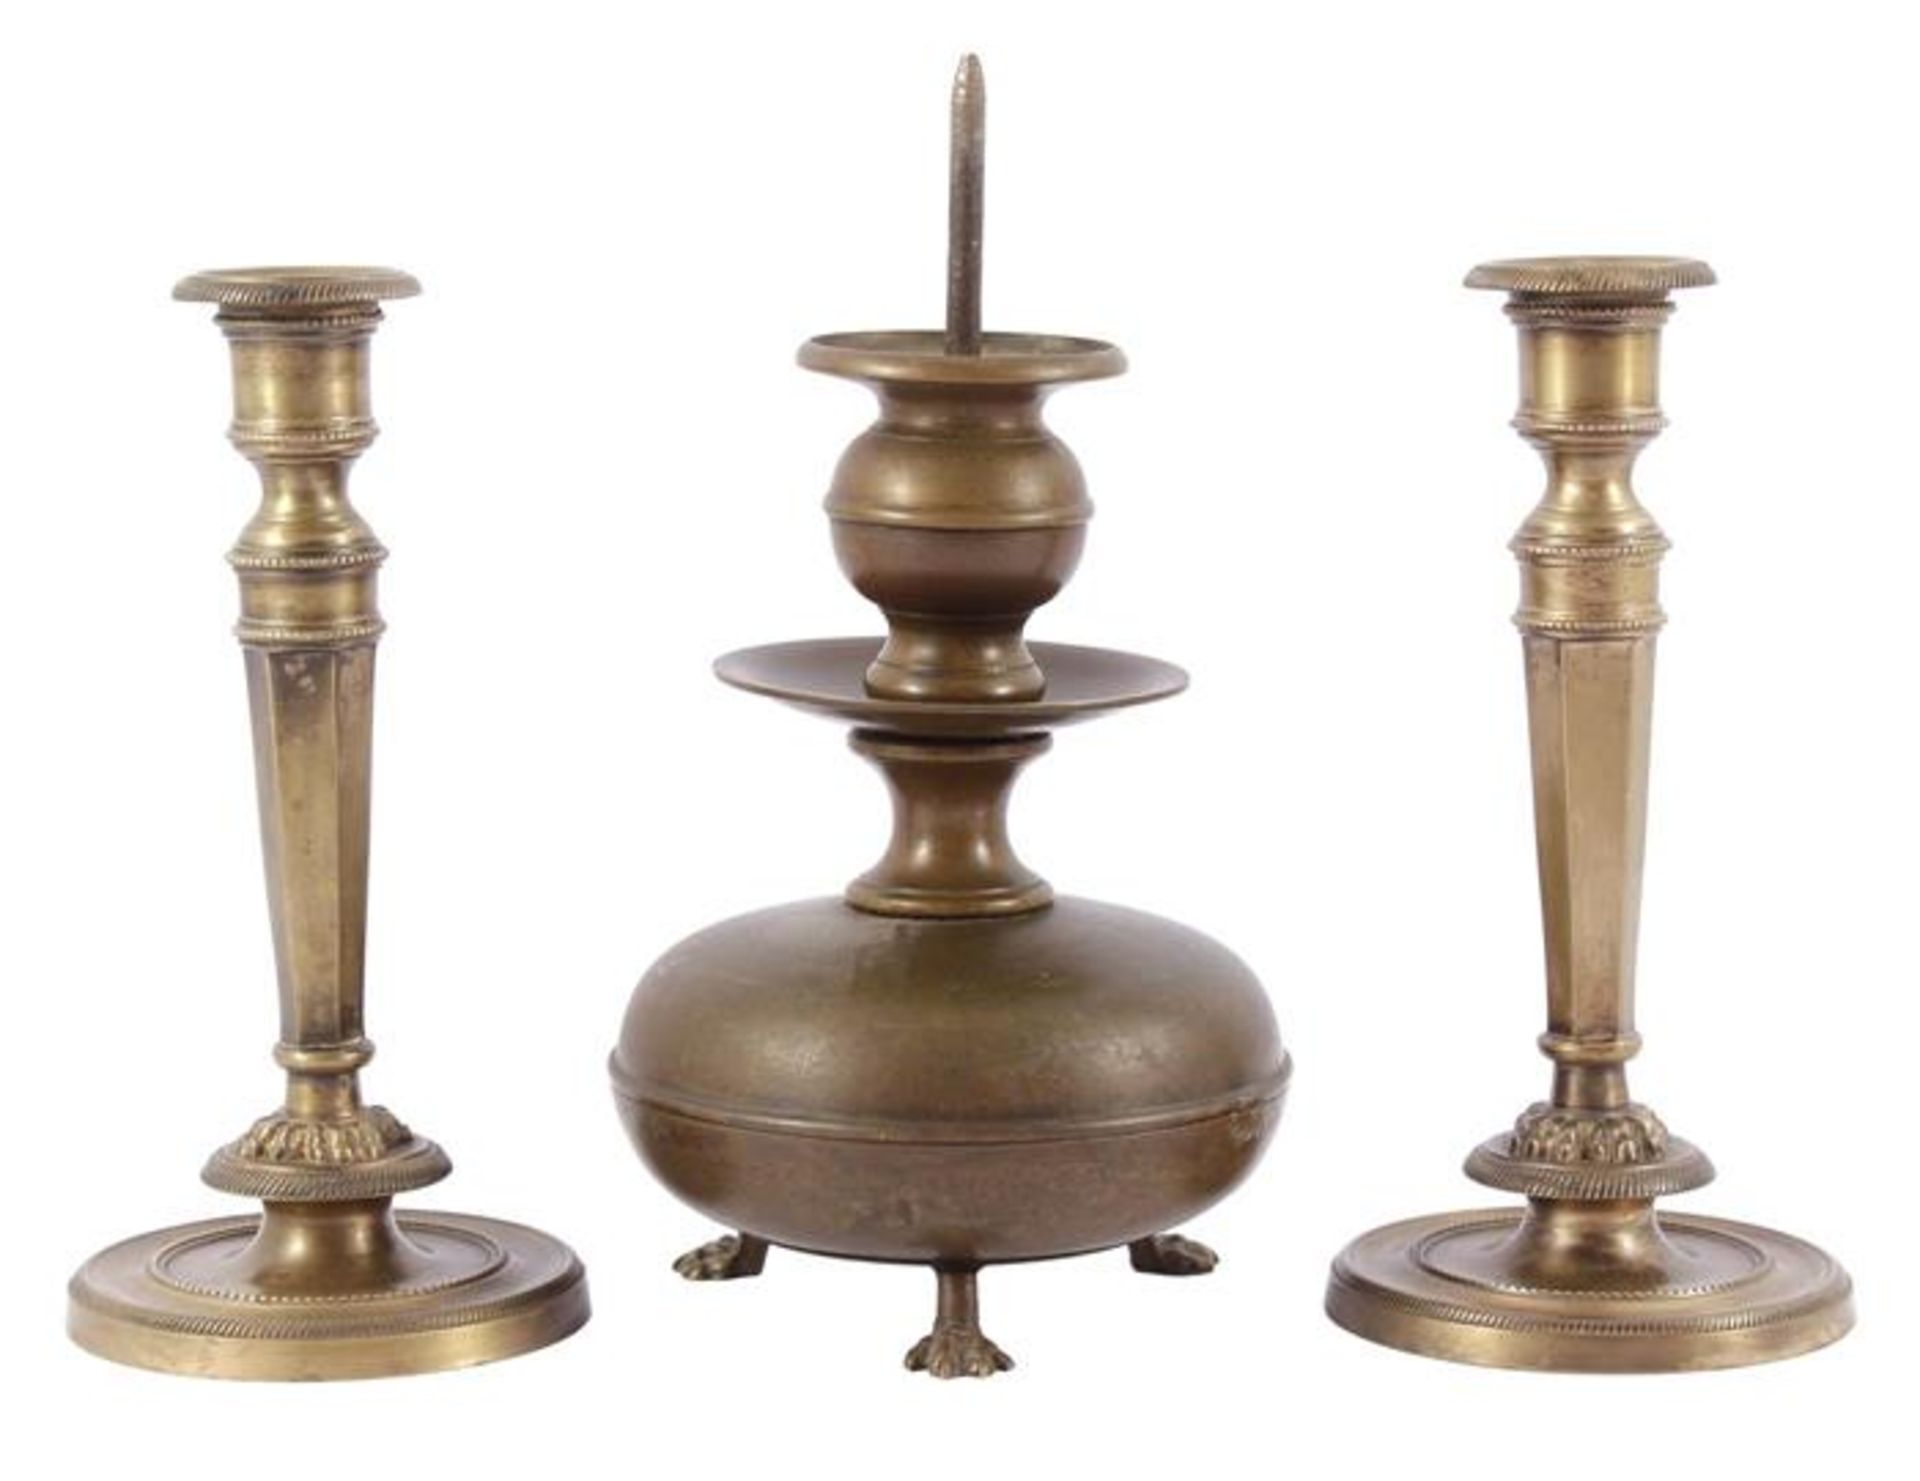 Antique copper pin candlestick, 29 cm high and 2 classic decorated candlesticks 24 cm high